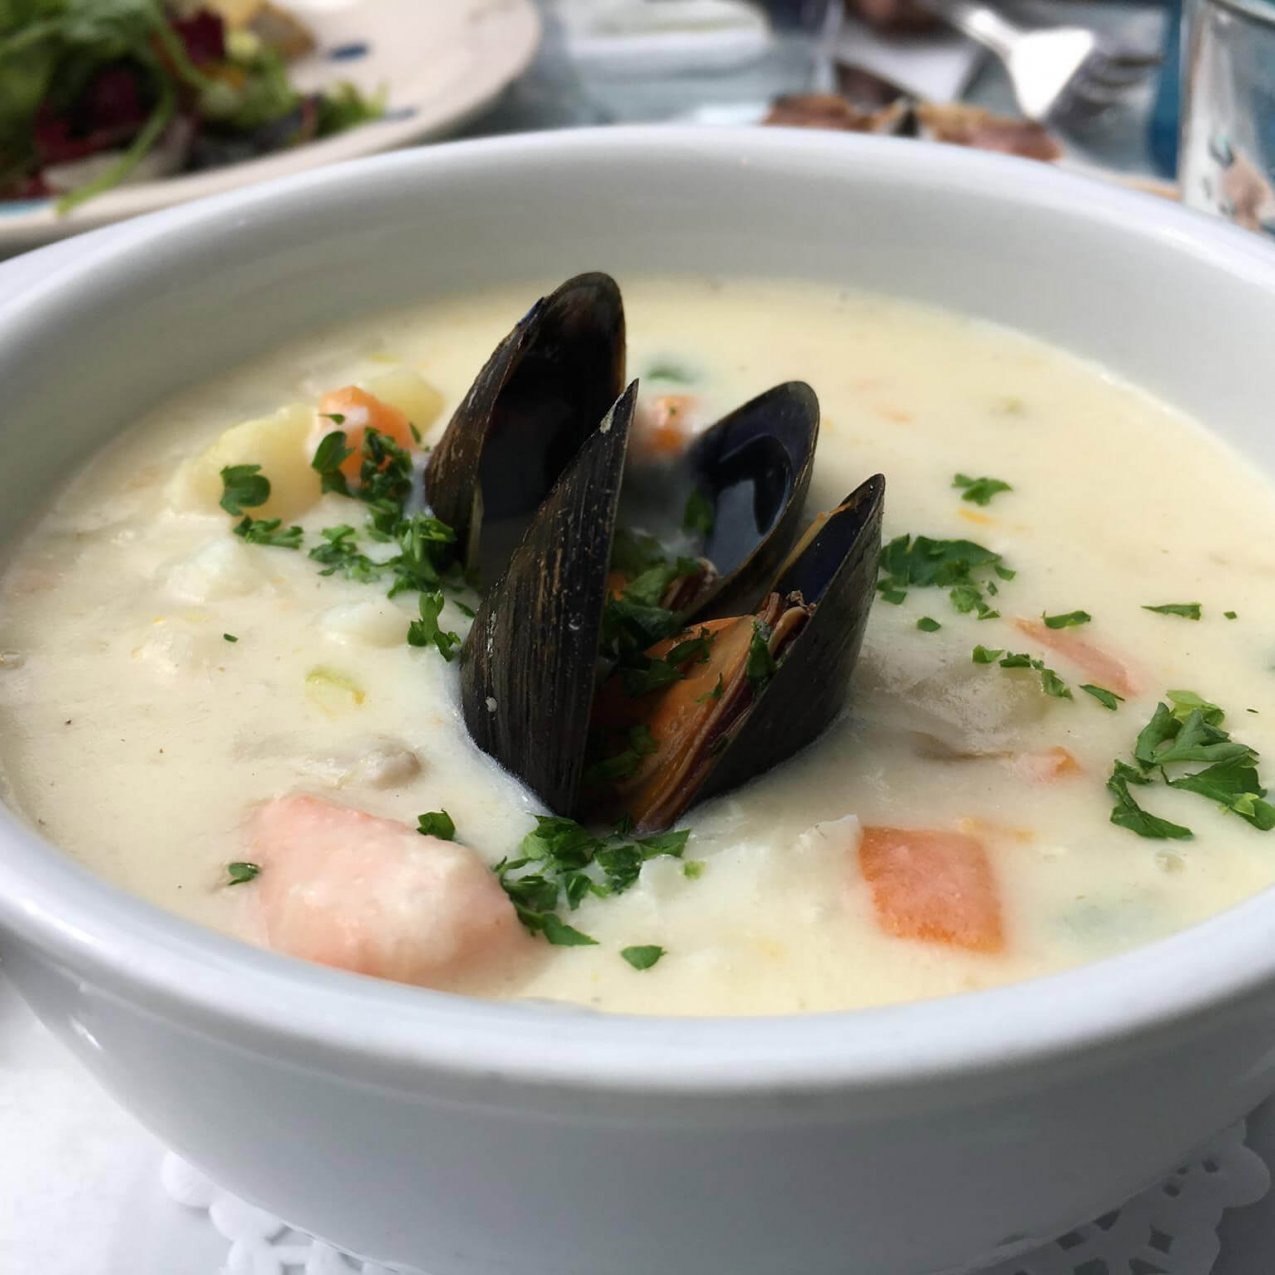 Creamy seafood chowder featuring mussels and herbs